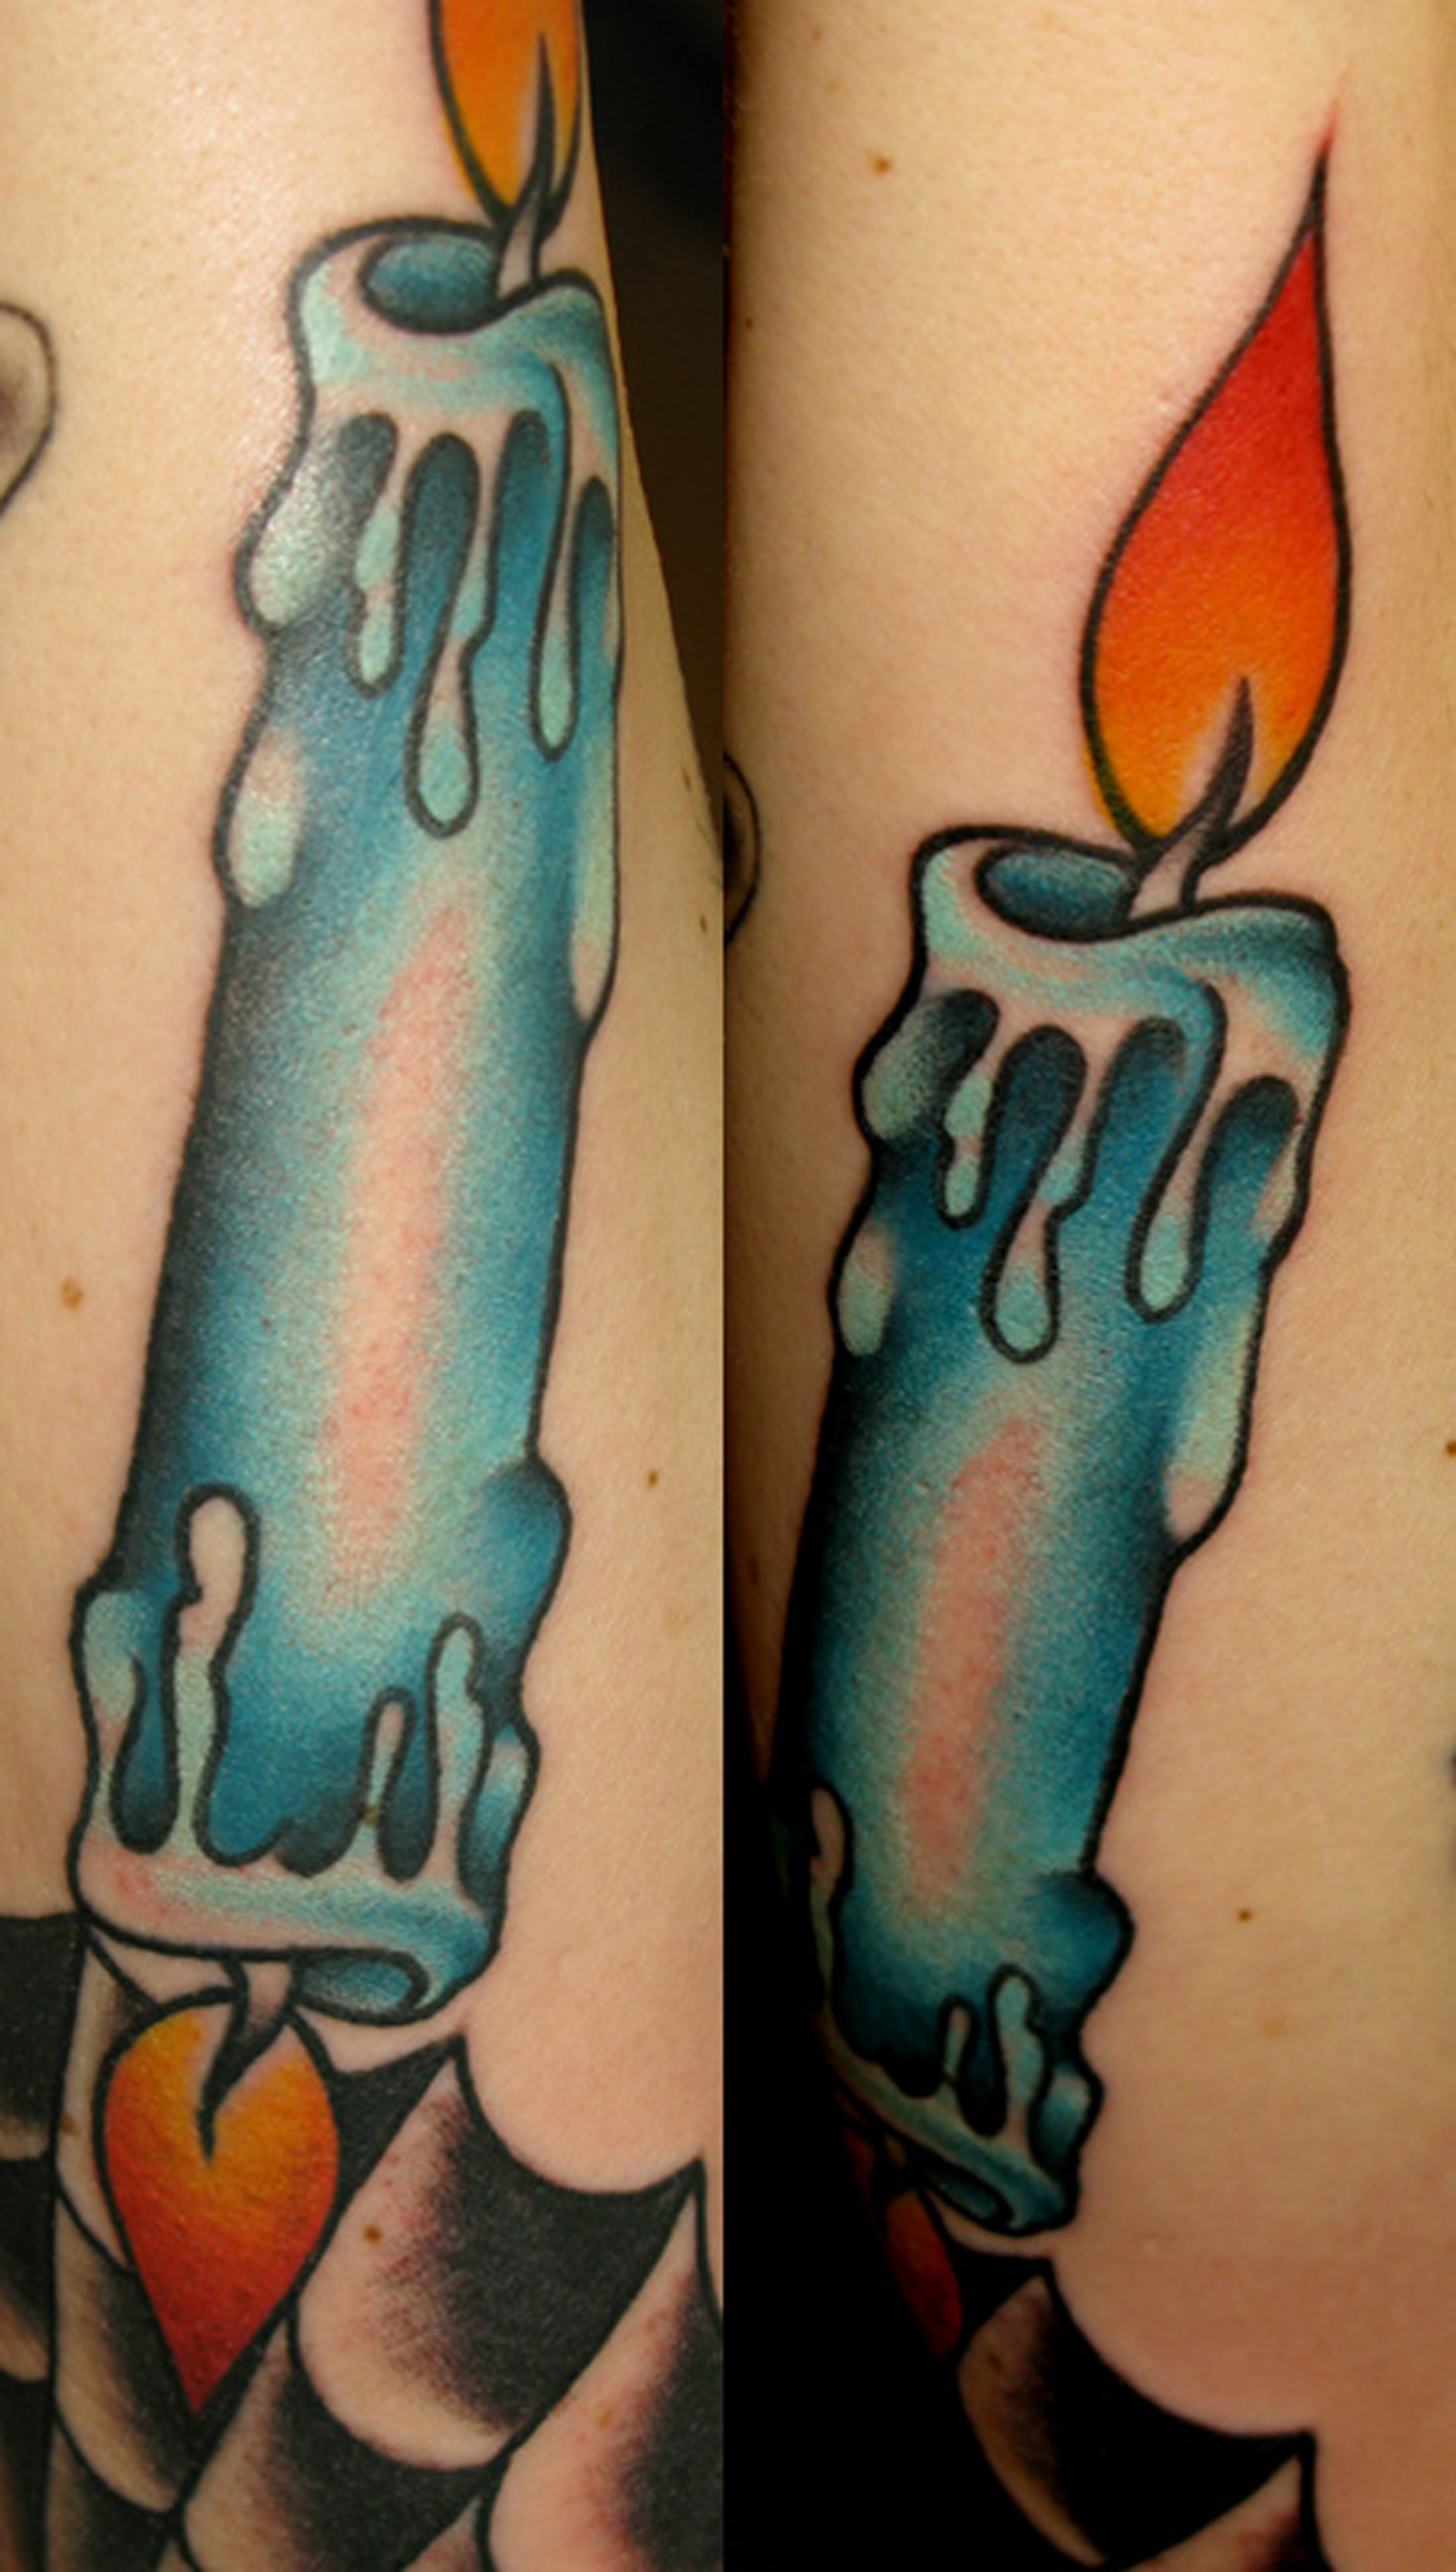 Green Candle Burning at Both Ends With Orange Flame Tattoo Design